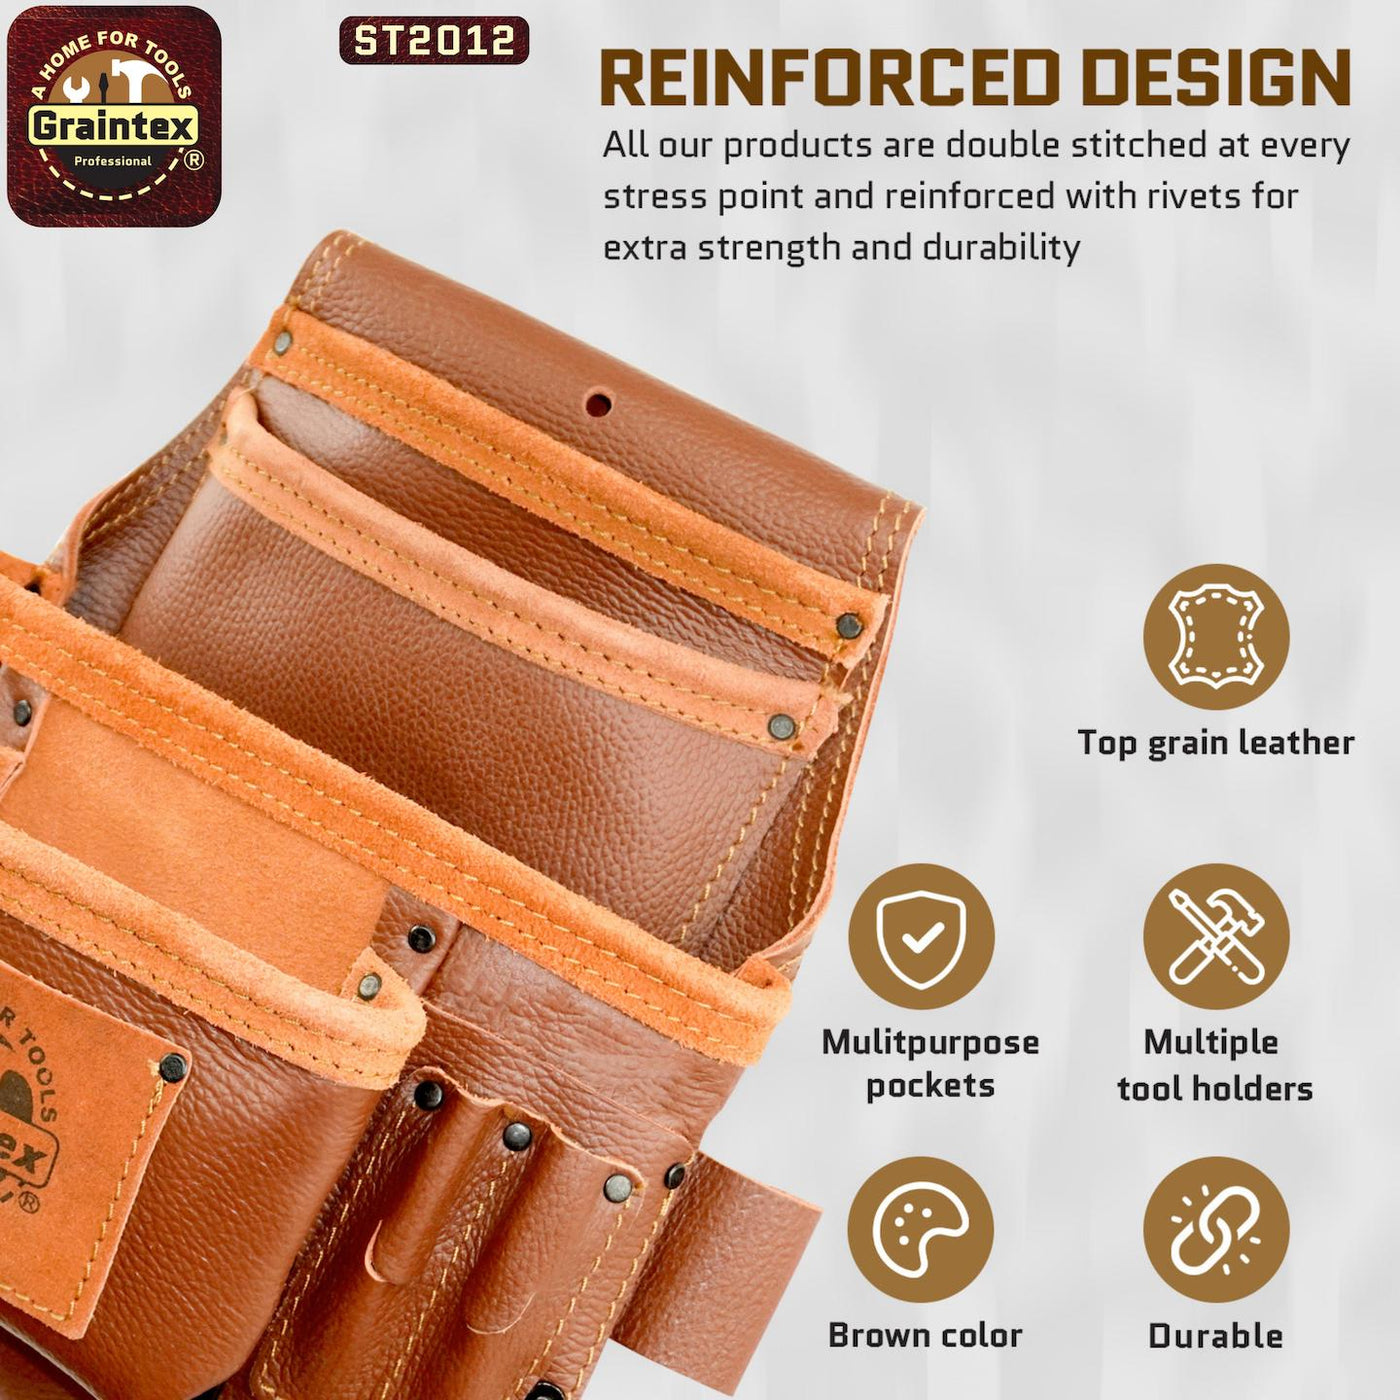 ST2012 :: 10 Pocket Nail & Tool Pouch Brown Color RUGGED Top Grain Leather